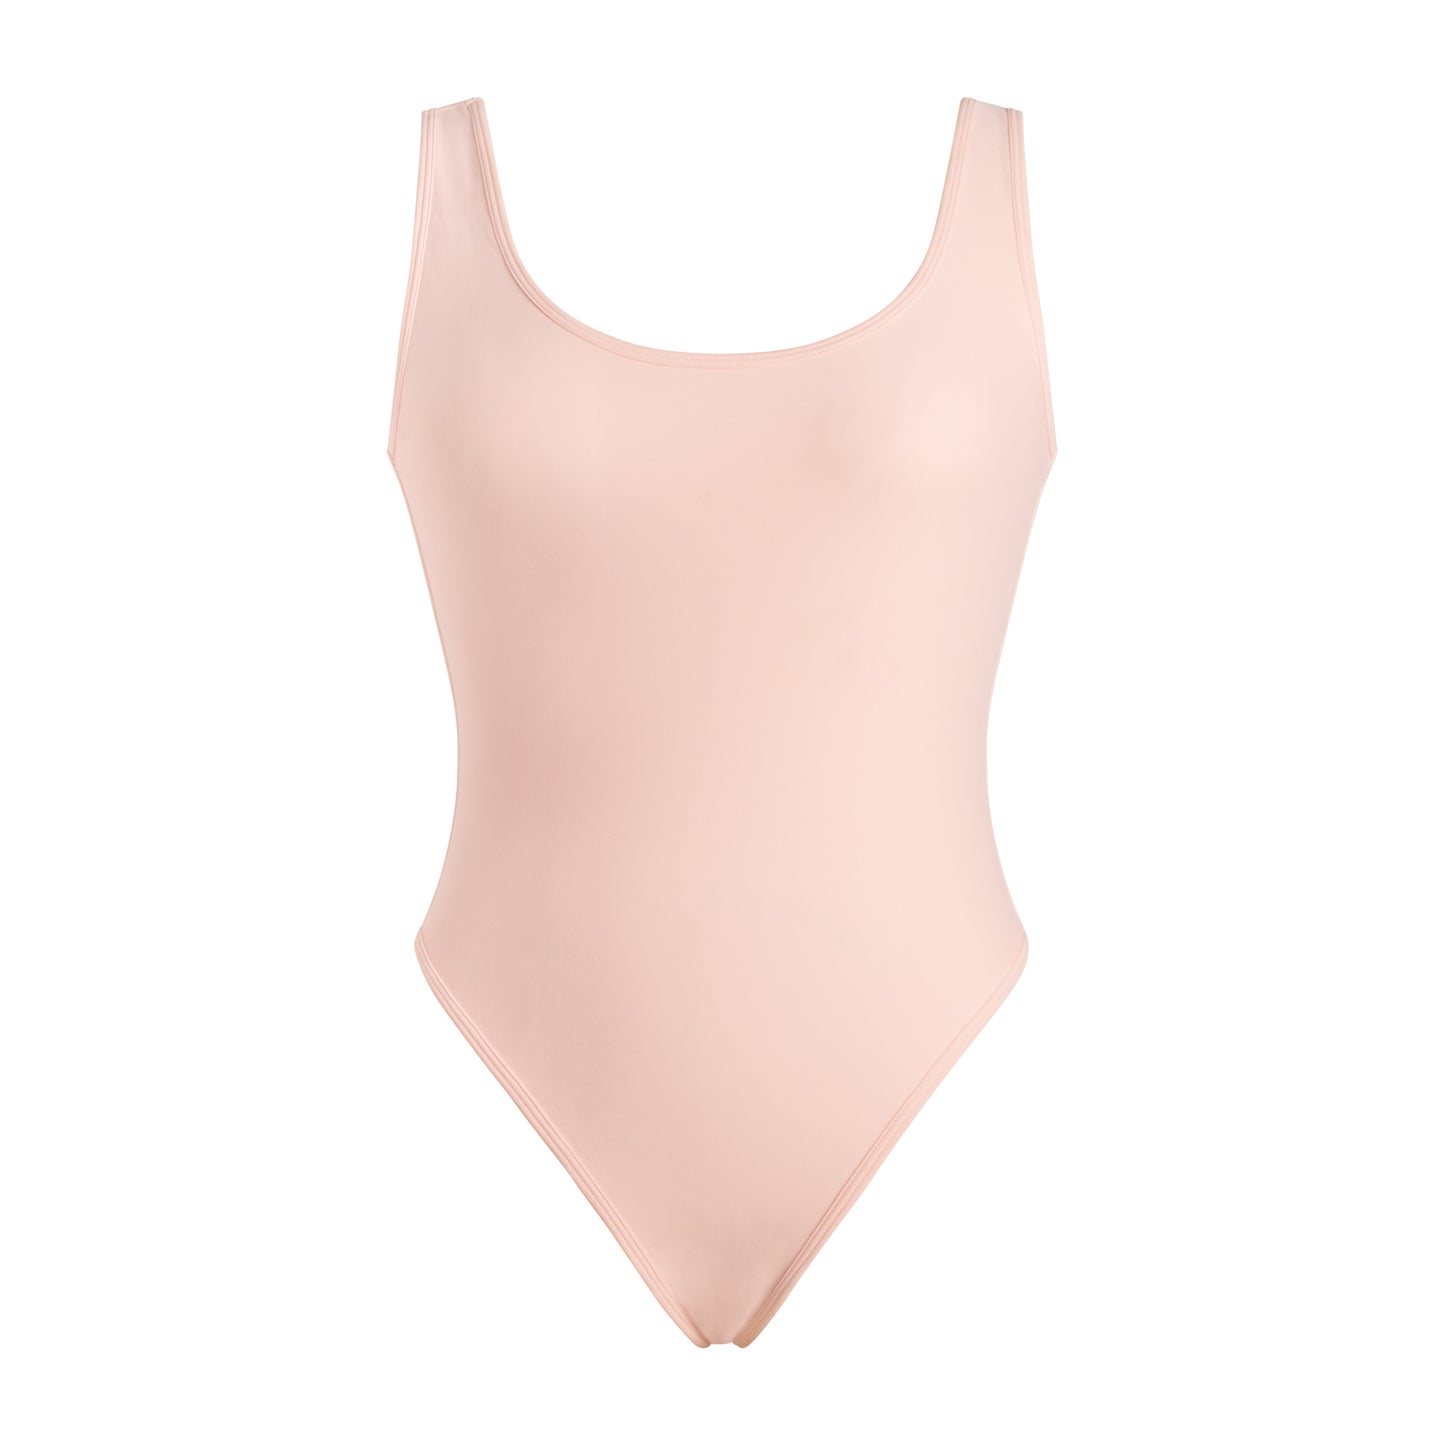 LIGHT CANDY PINK FULL COVERAGE BODYSUIT